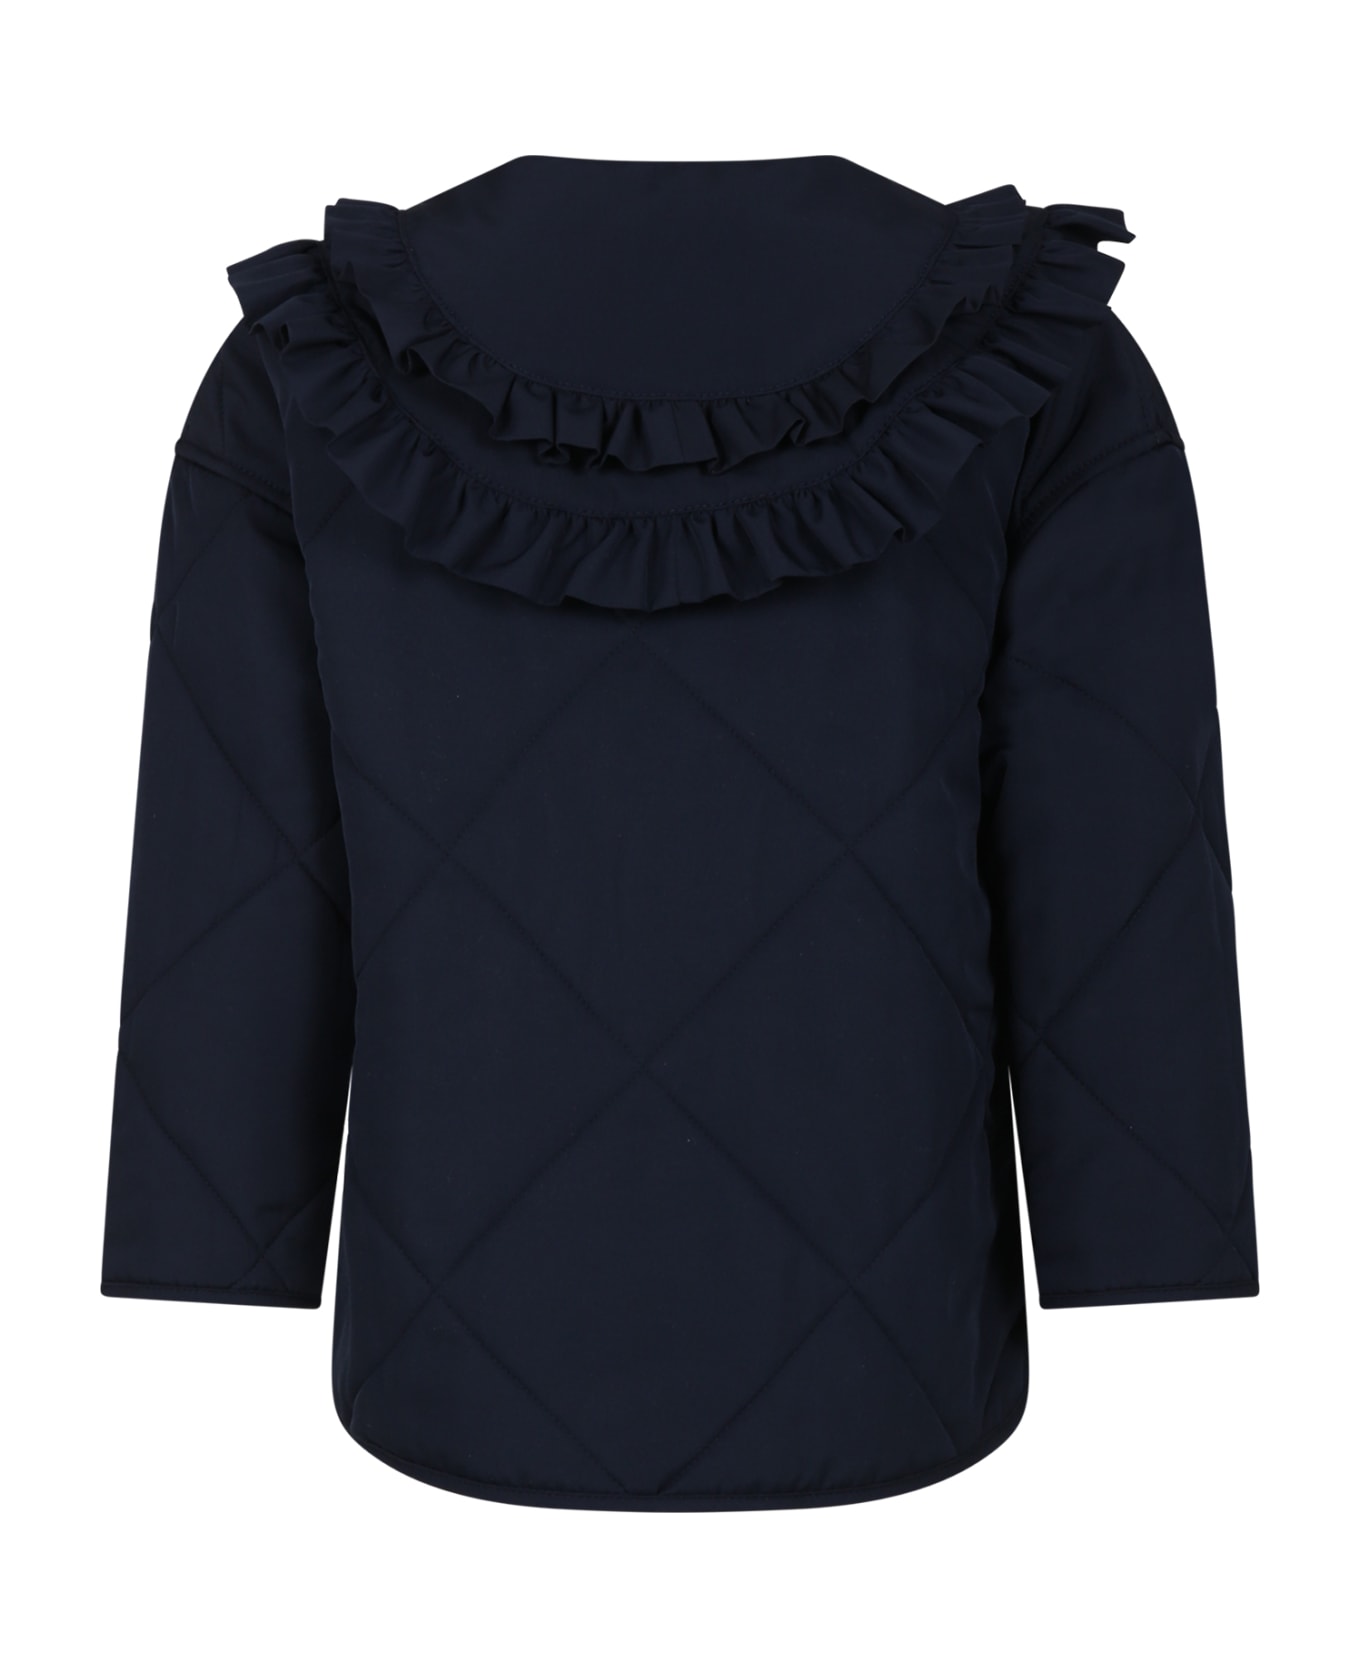 Philosophy di Lorenzo Serafini Kids Blue Down Jacket For Girl With Frills - Blue